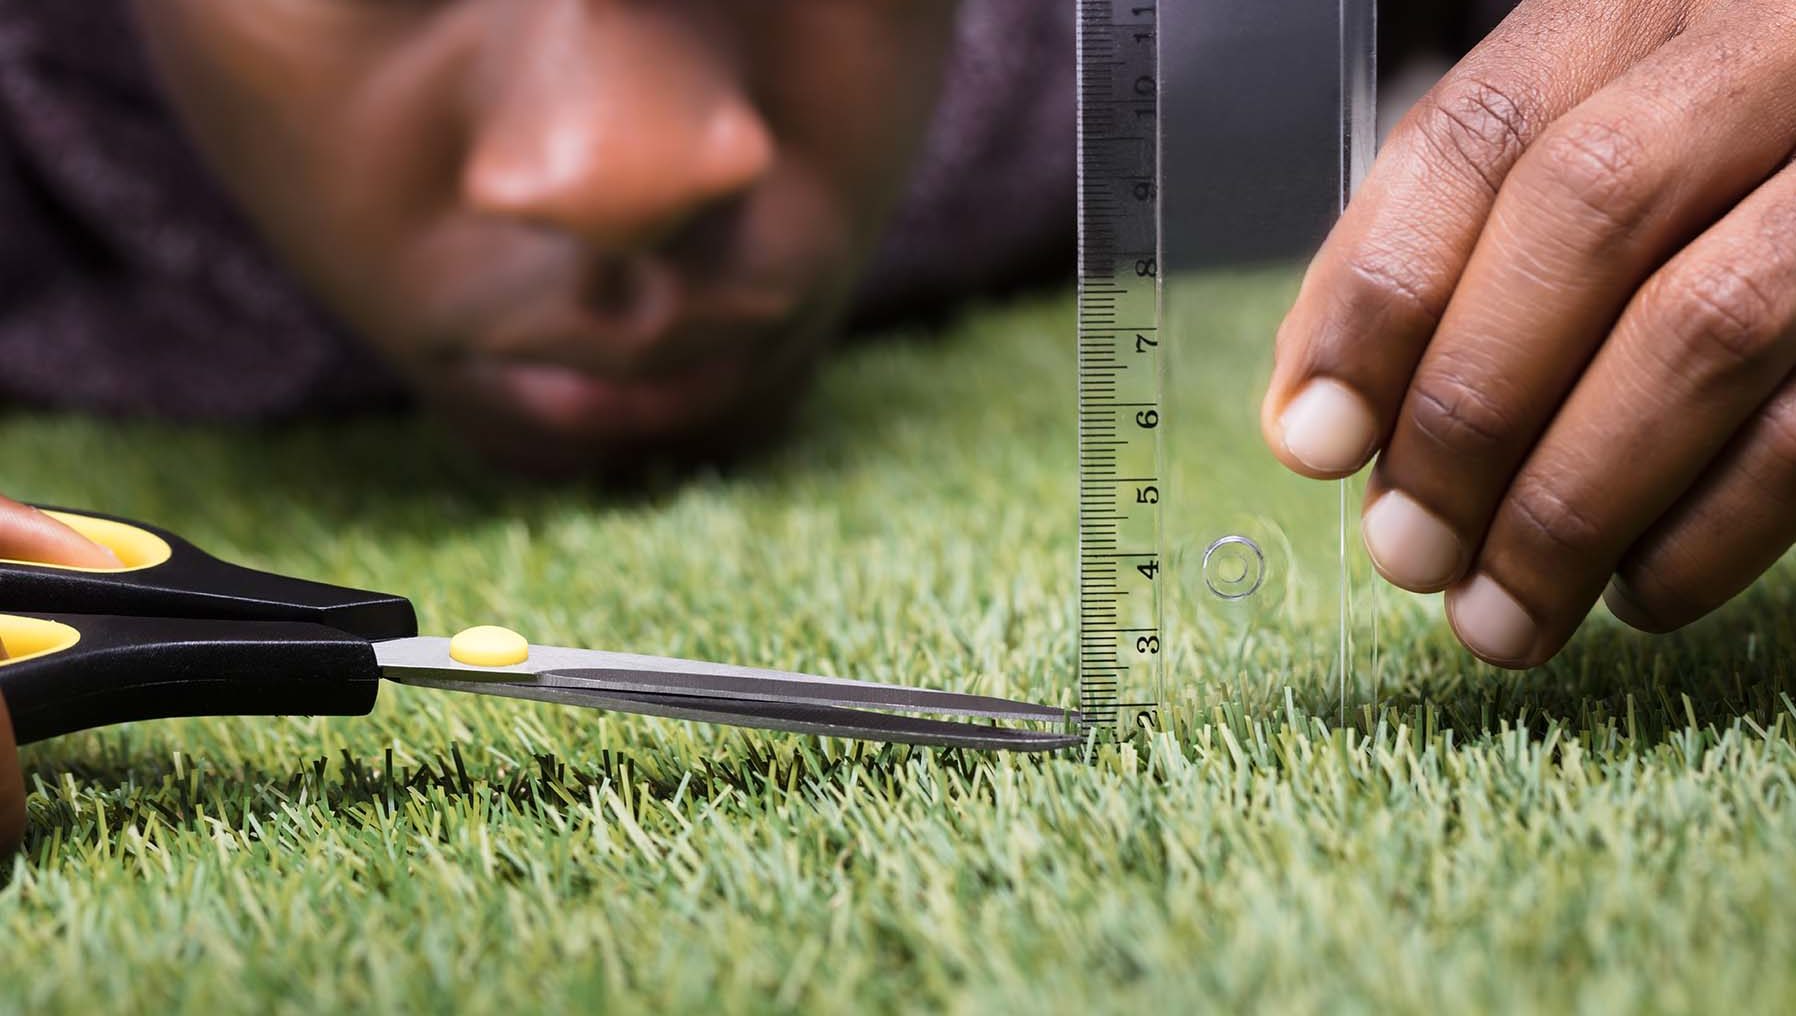 Perfectionist man lies in grass with ruler and scissors to measure grass blades.